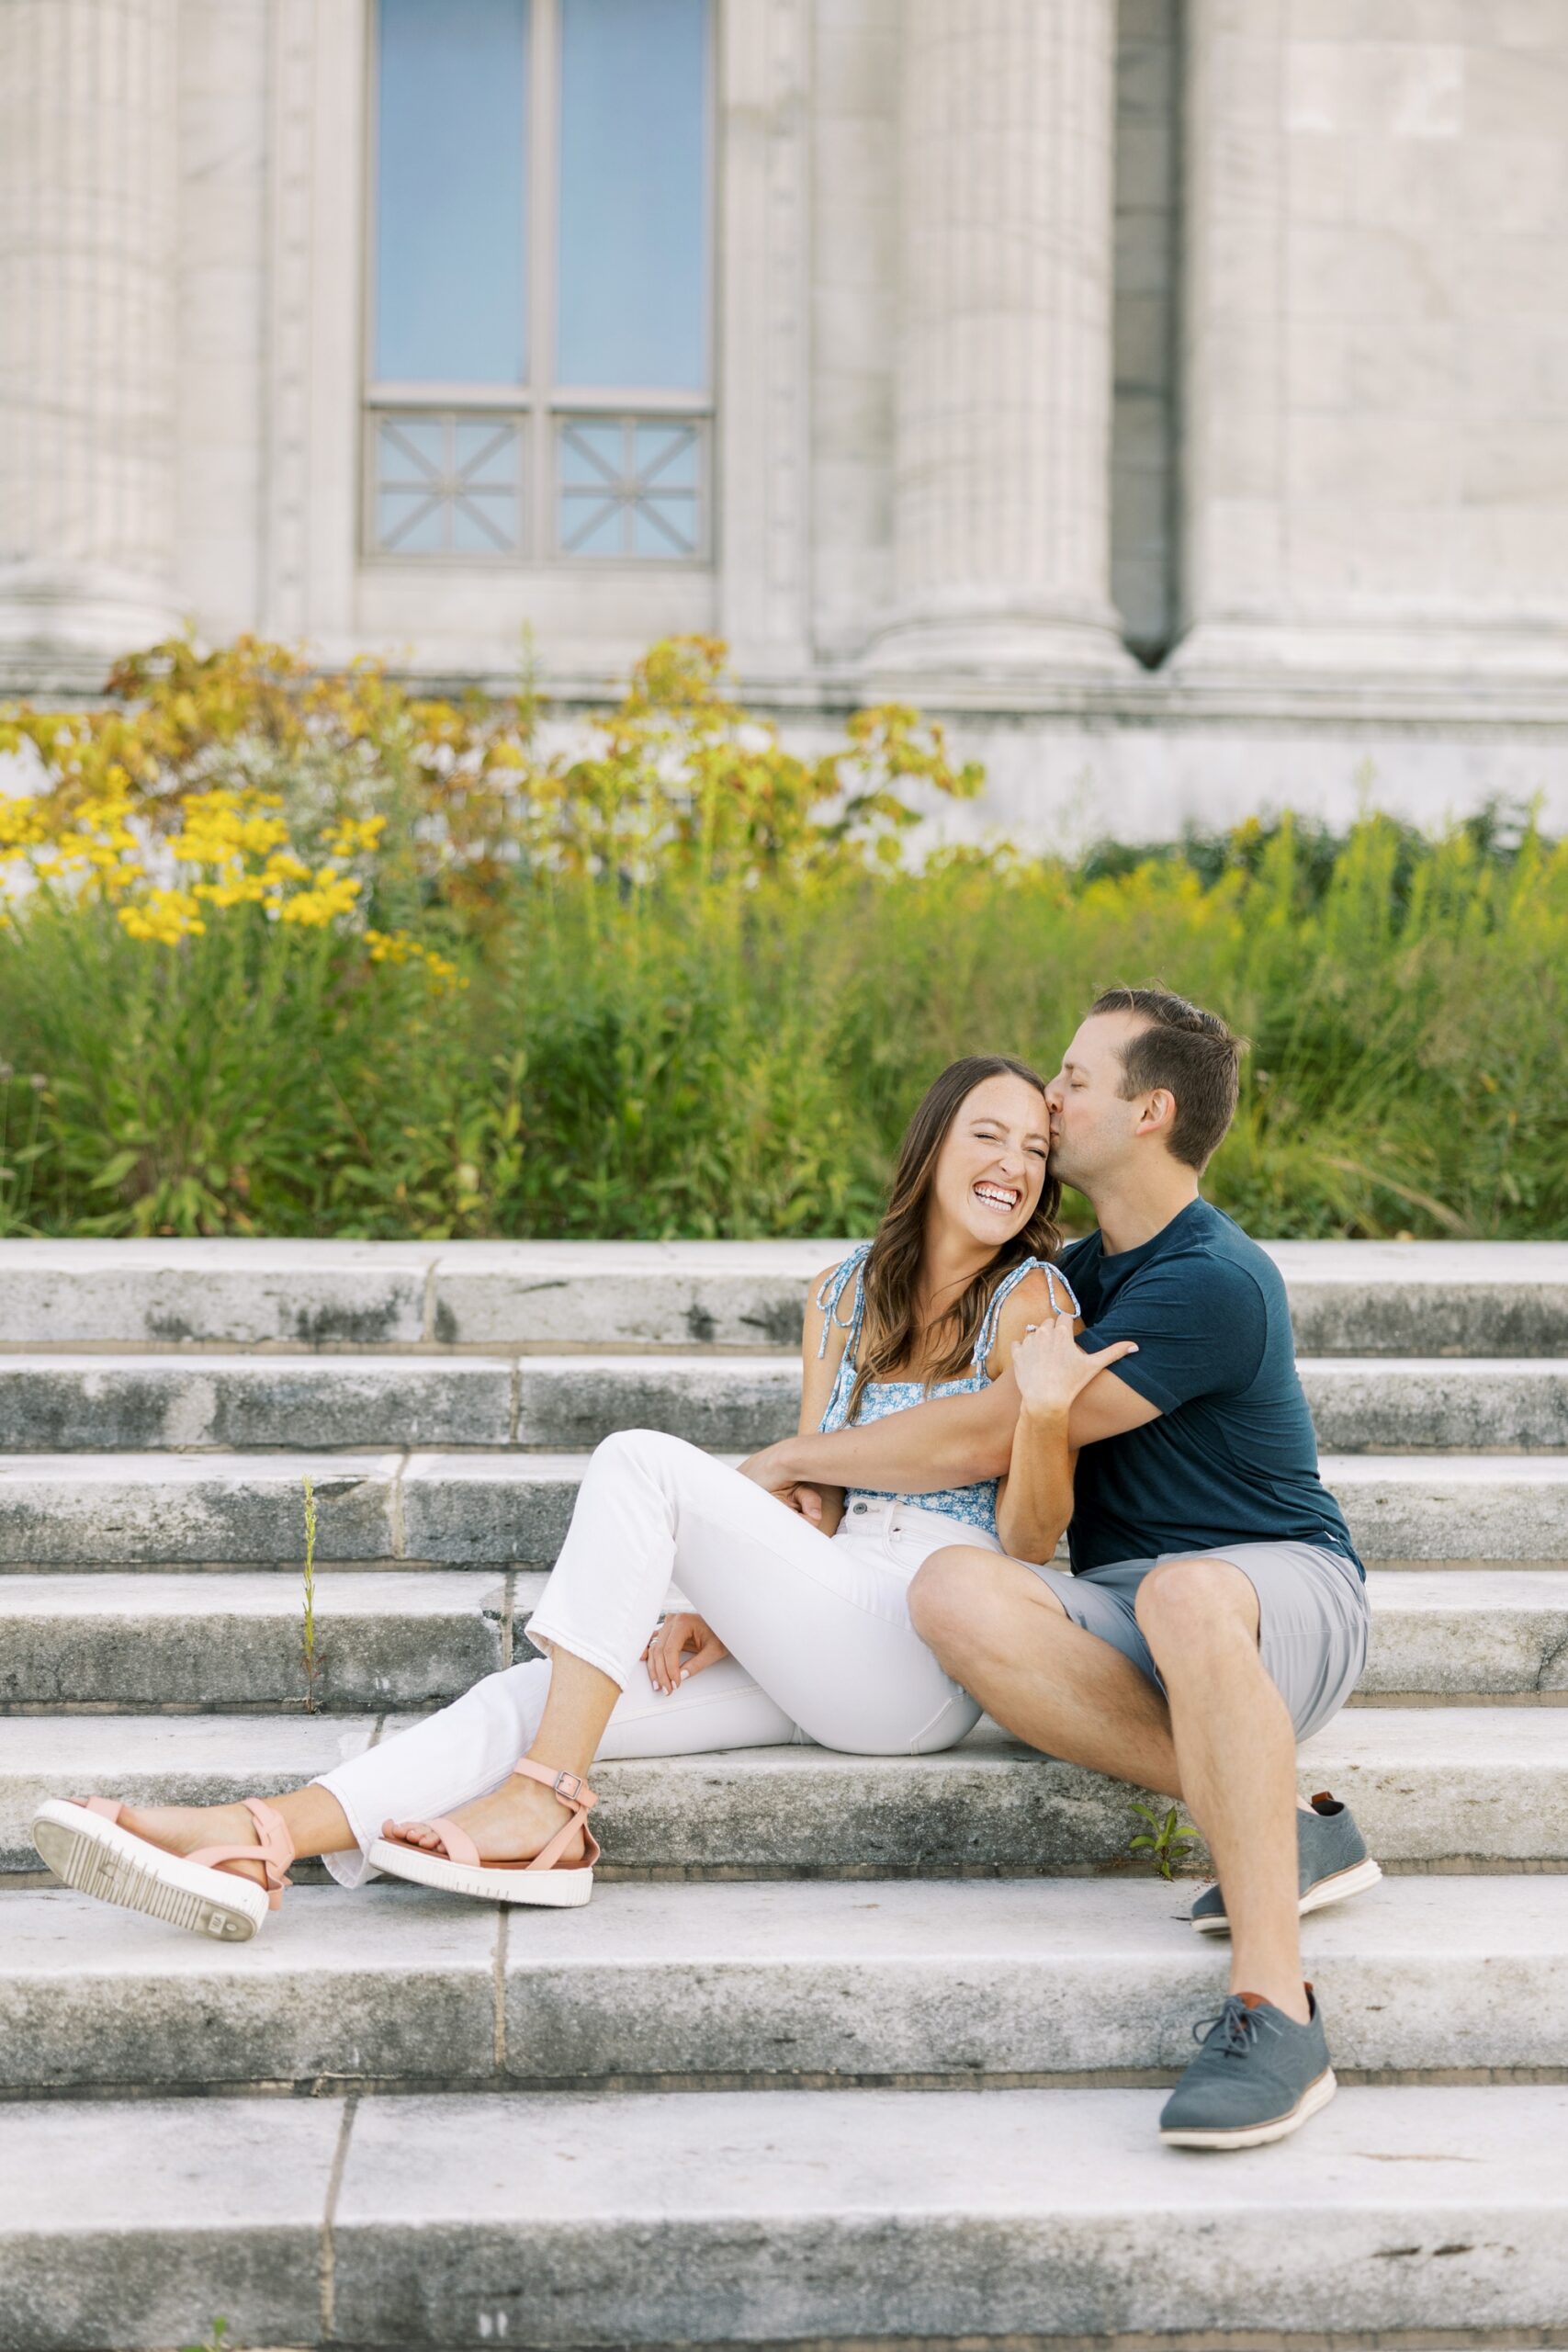 The couple sat during their Chicago Museum Campus engagement photo session